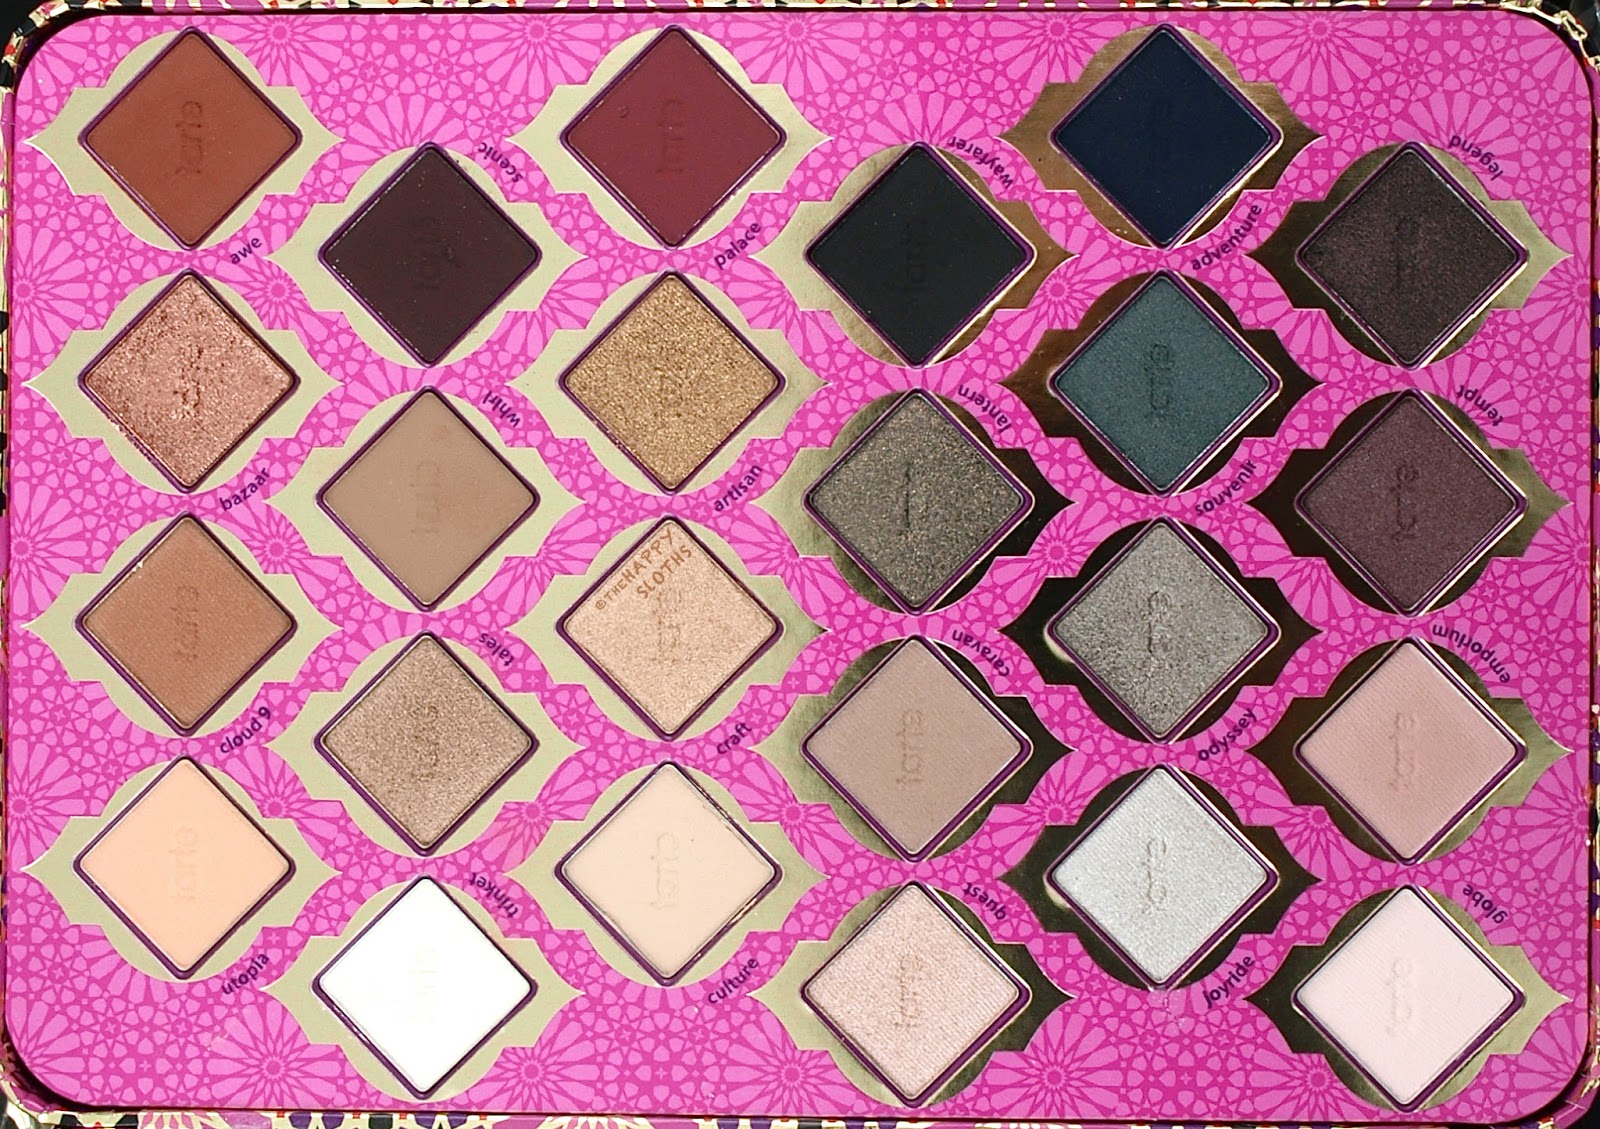 Tarte Holiday 2017 Treasure Box Collector's Set: Review and Swatches